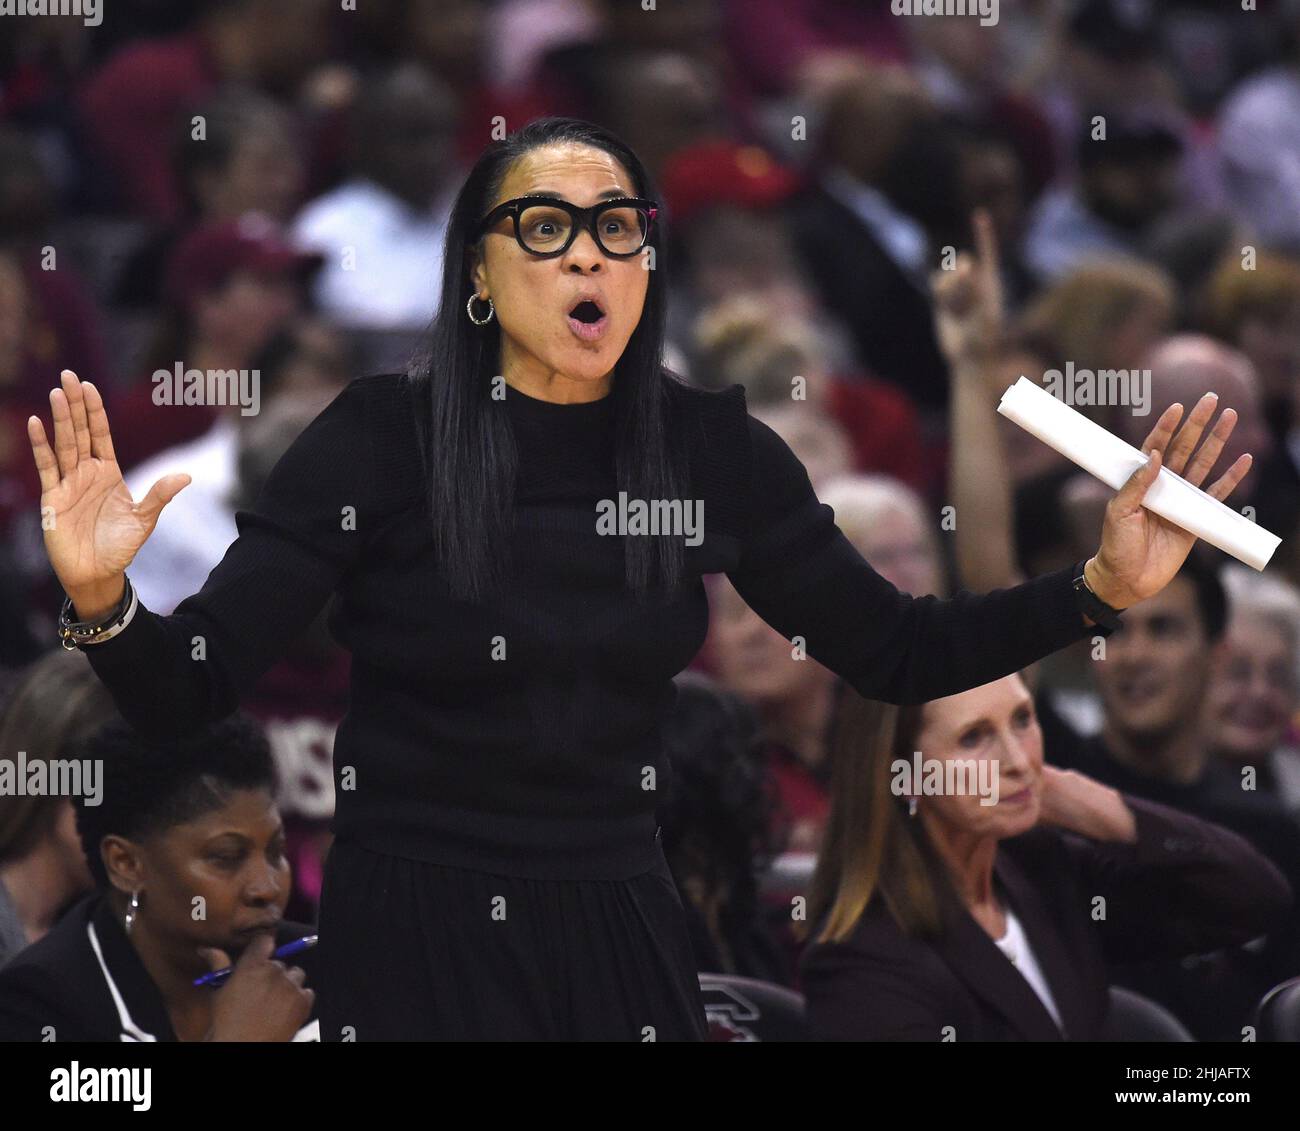 Kolumbien, USA. Februar 2020, 10th. South Carolina Cheftrainer Dawn Staley während eines Spiels Aganist Connecticut in Colonial Life Arena in Columbia, South Carolina, am 10. Februar 2020. (Foto: Brad Horrigan/Hartford Courant/TNS/Sipa USA) Quelle: SIPA USA/Alamy Live News Stockfoto